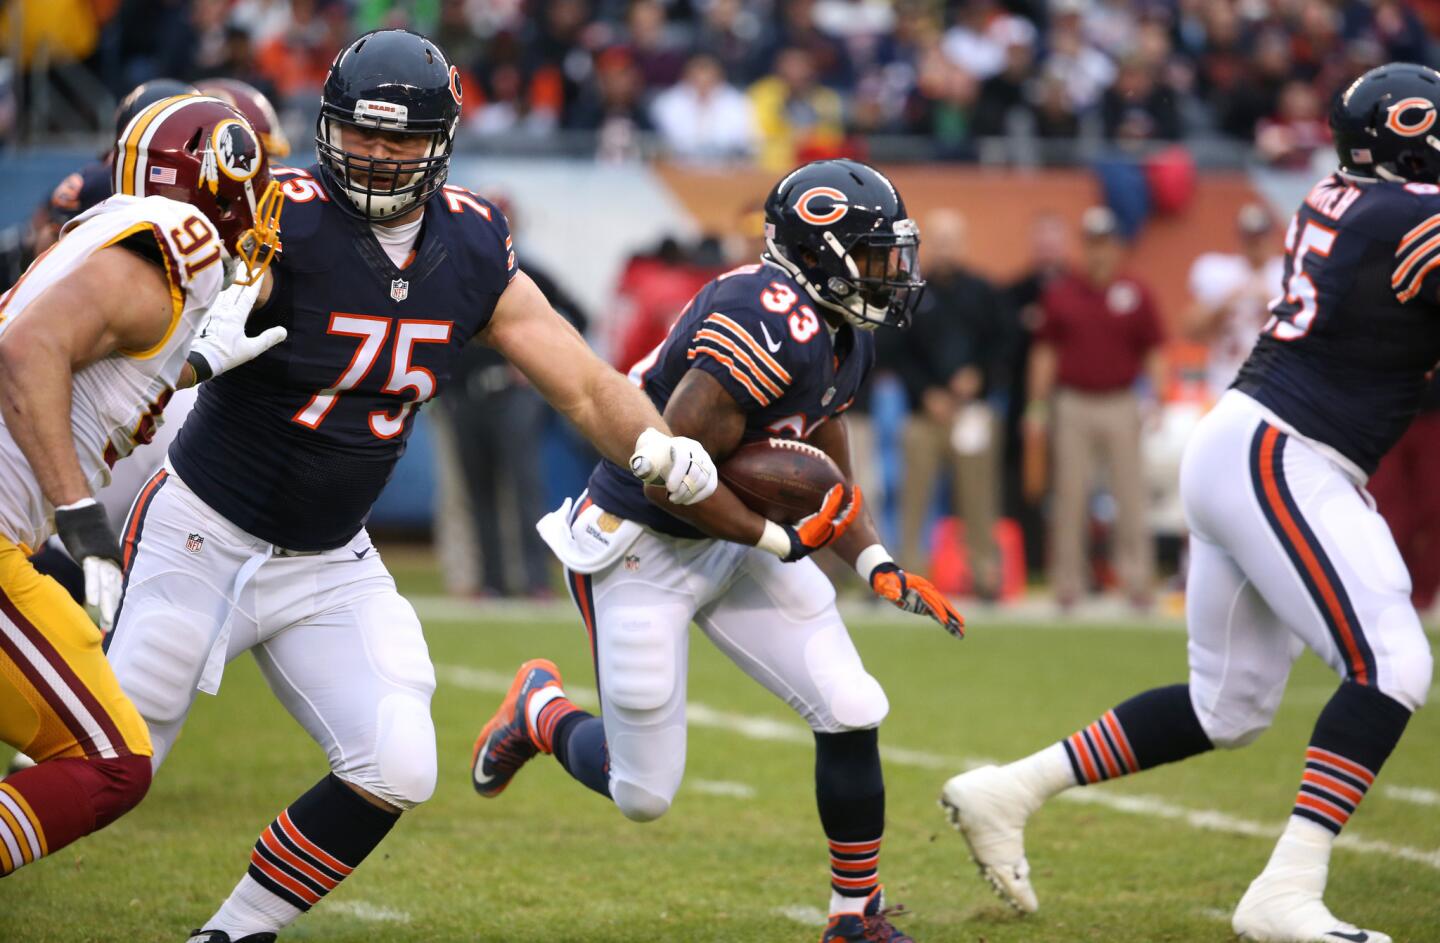 Chicago Bears offensive tackle Kyle Long (75) blocks on a run by running back Jeremy Langford (33) in the first quarter of a game at Soldier Field in Chicago on Dec. 13, 2015.